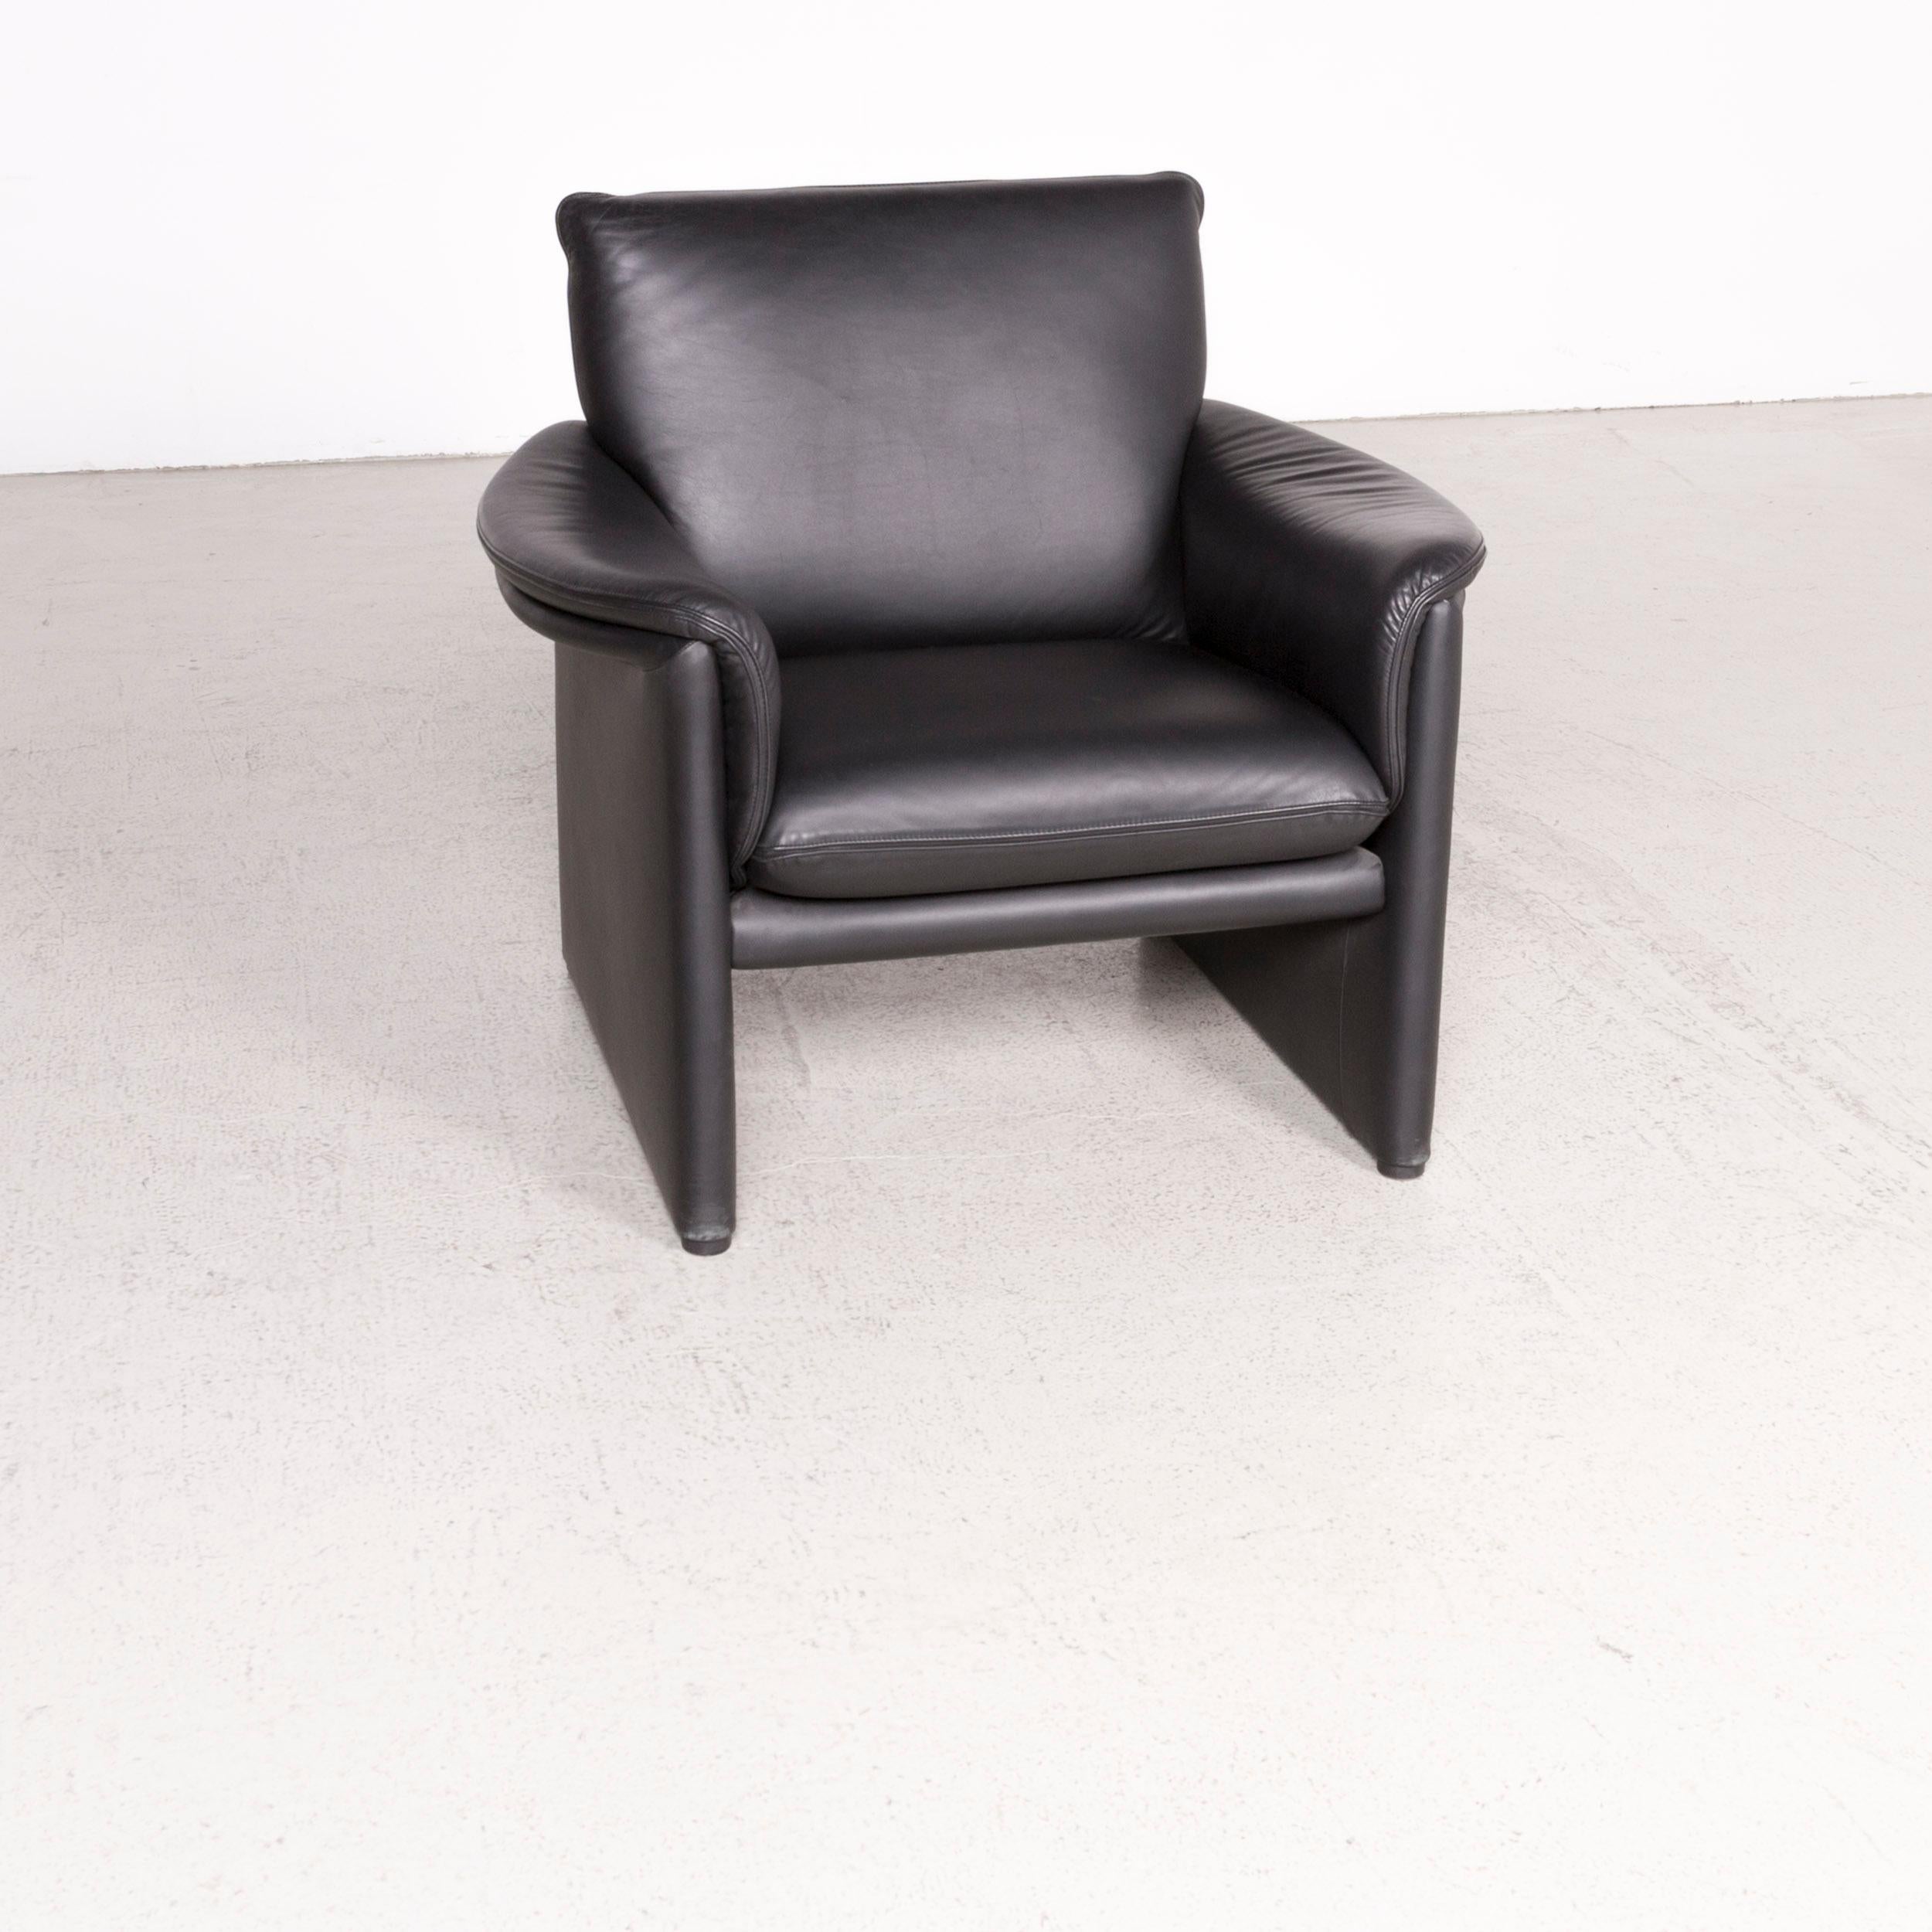 We bring to you a COR Zento designer leather armchair black genuine leather chair.
 

Product measures in centimeters:

Depth: 80
Width: 95
Height: 85
Seat-height: 45
Rest-height: 60
Seat-depth: 50
Seat-width: 50
Back-height: 50.